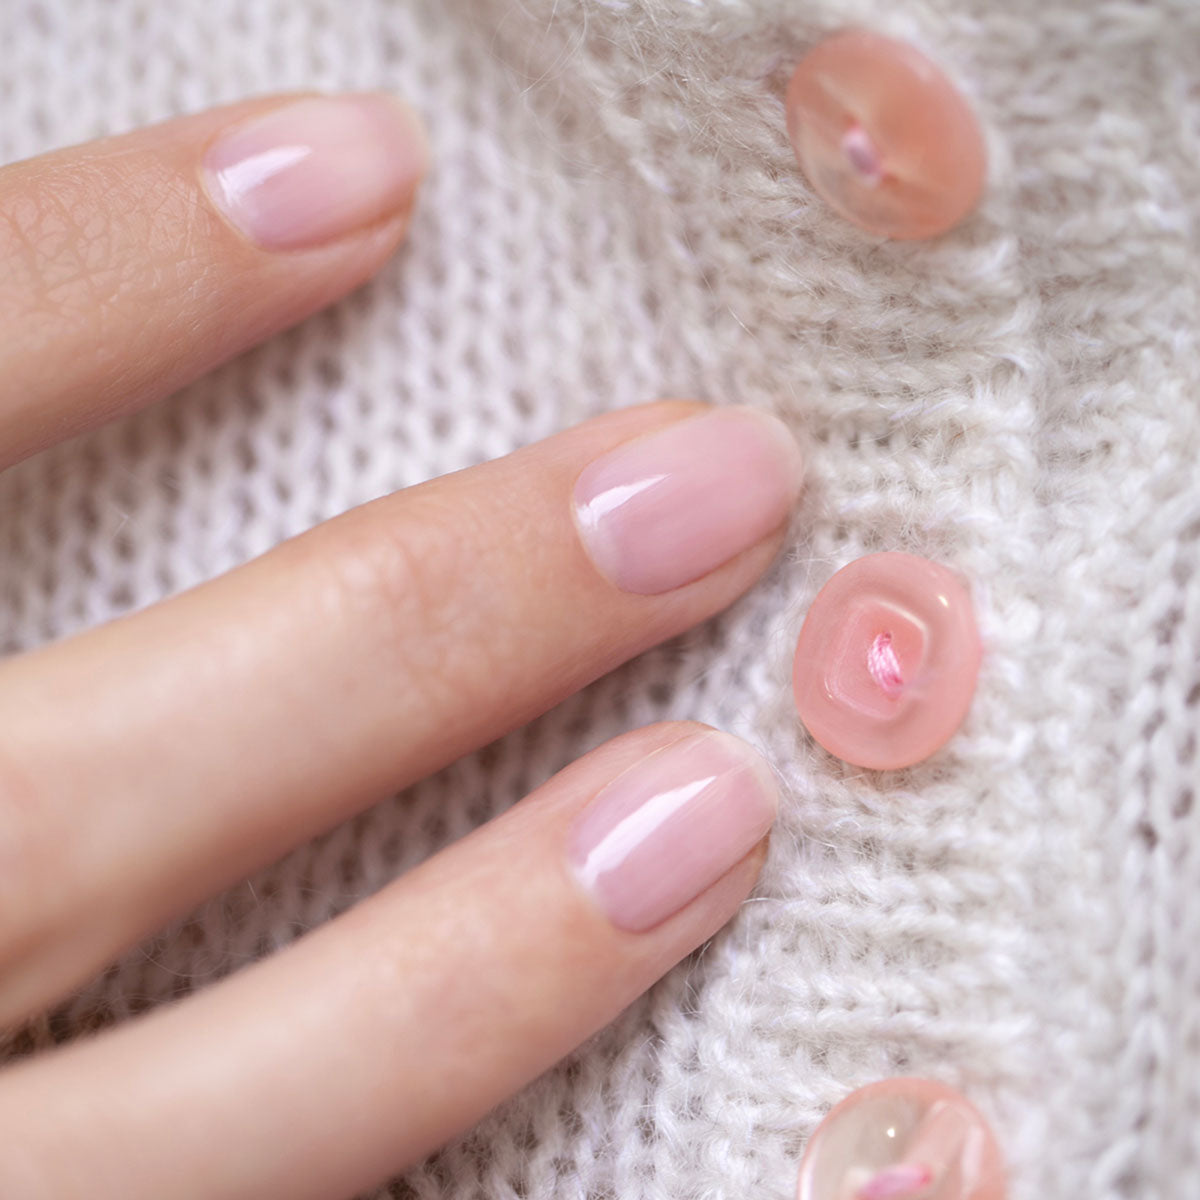 40+ Rose Nails To Inspire Your Next Manicure | Gel nails, Stylish nails,  Acrylic nails